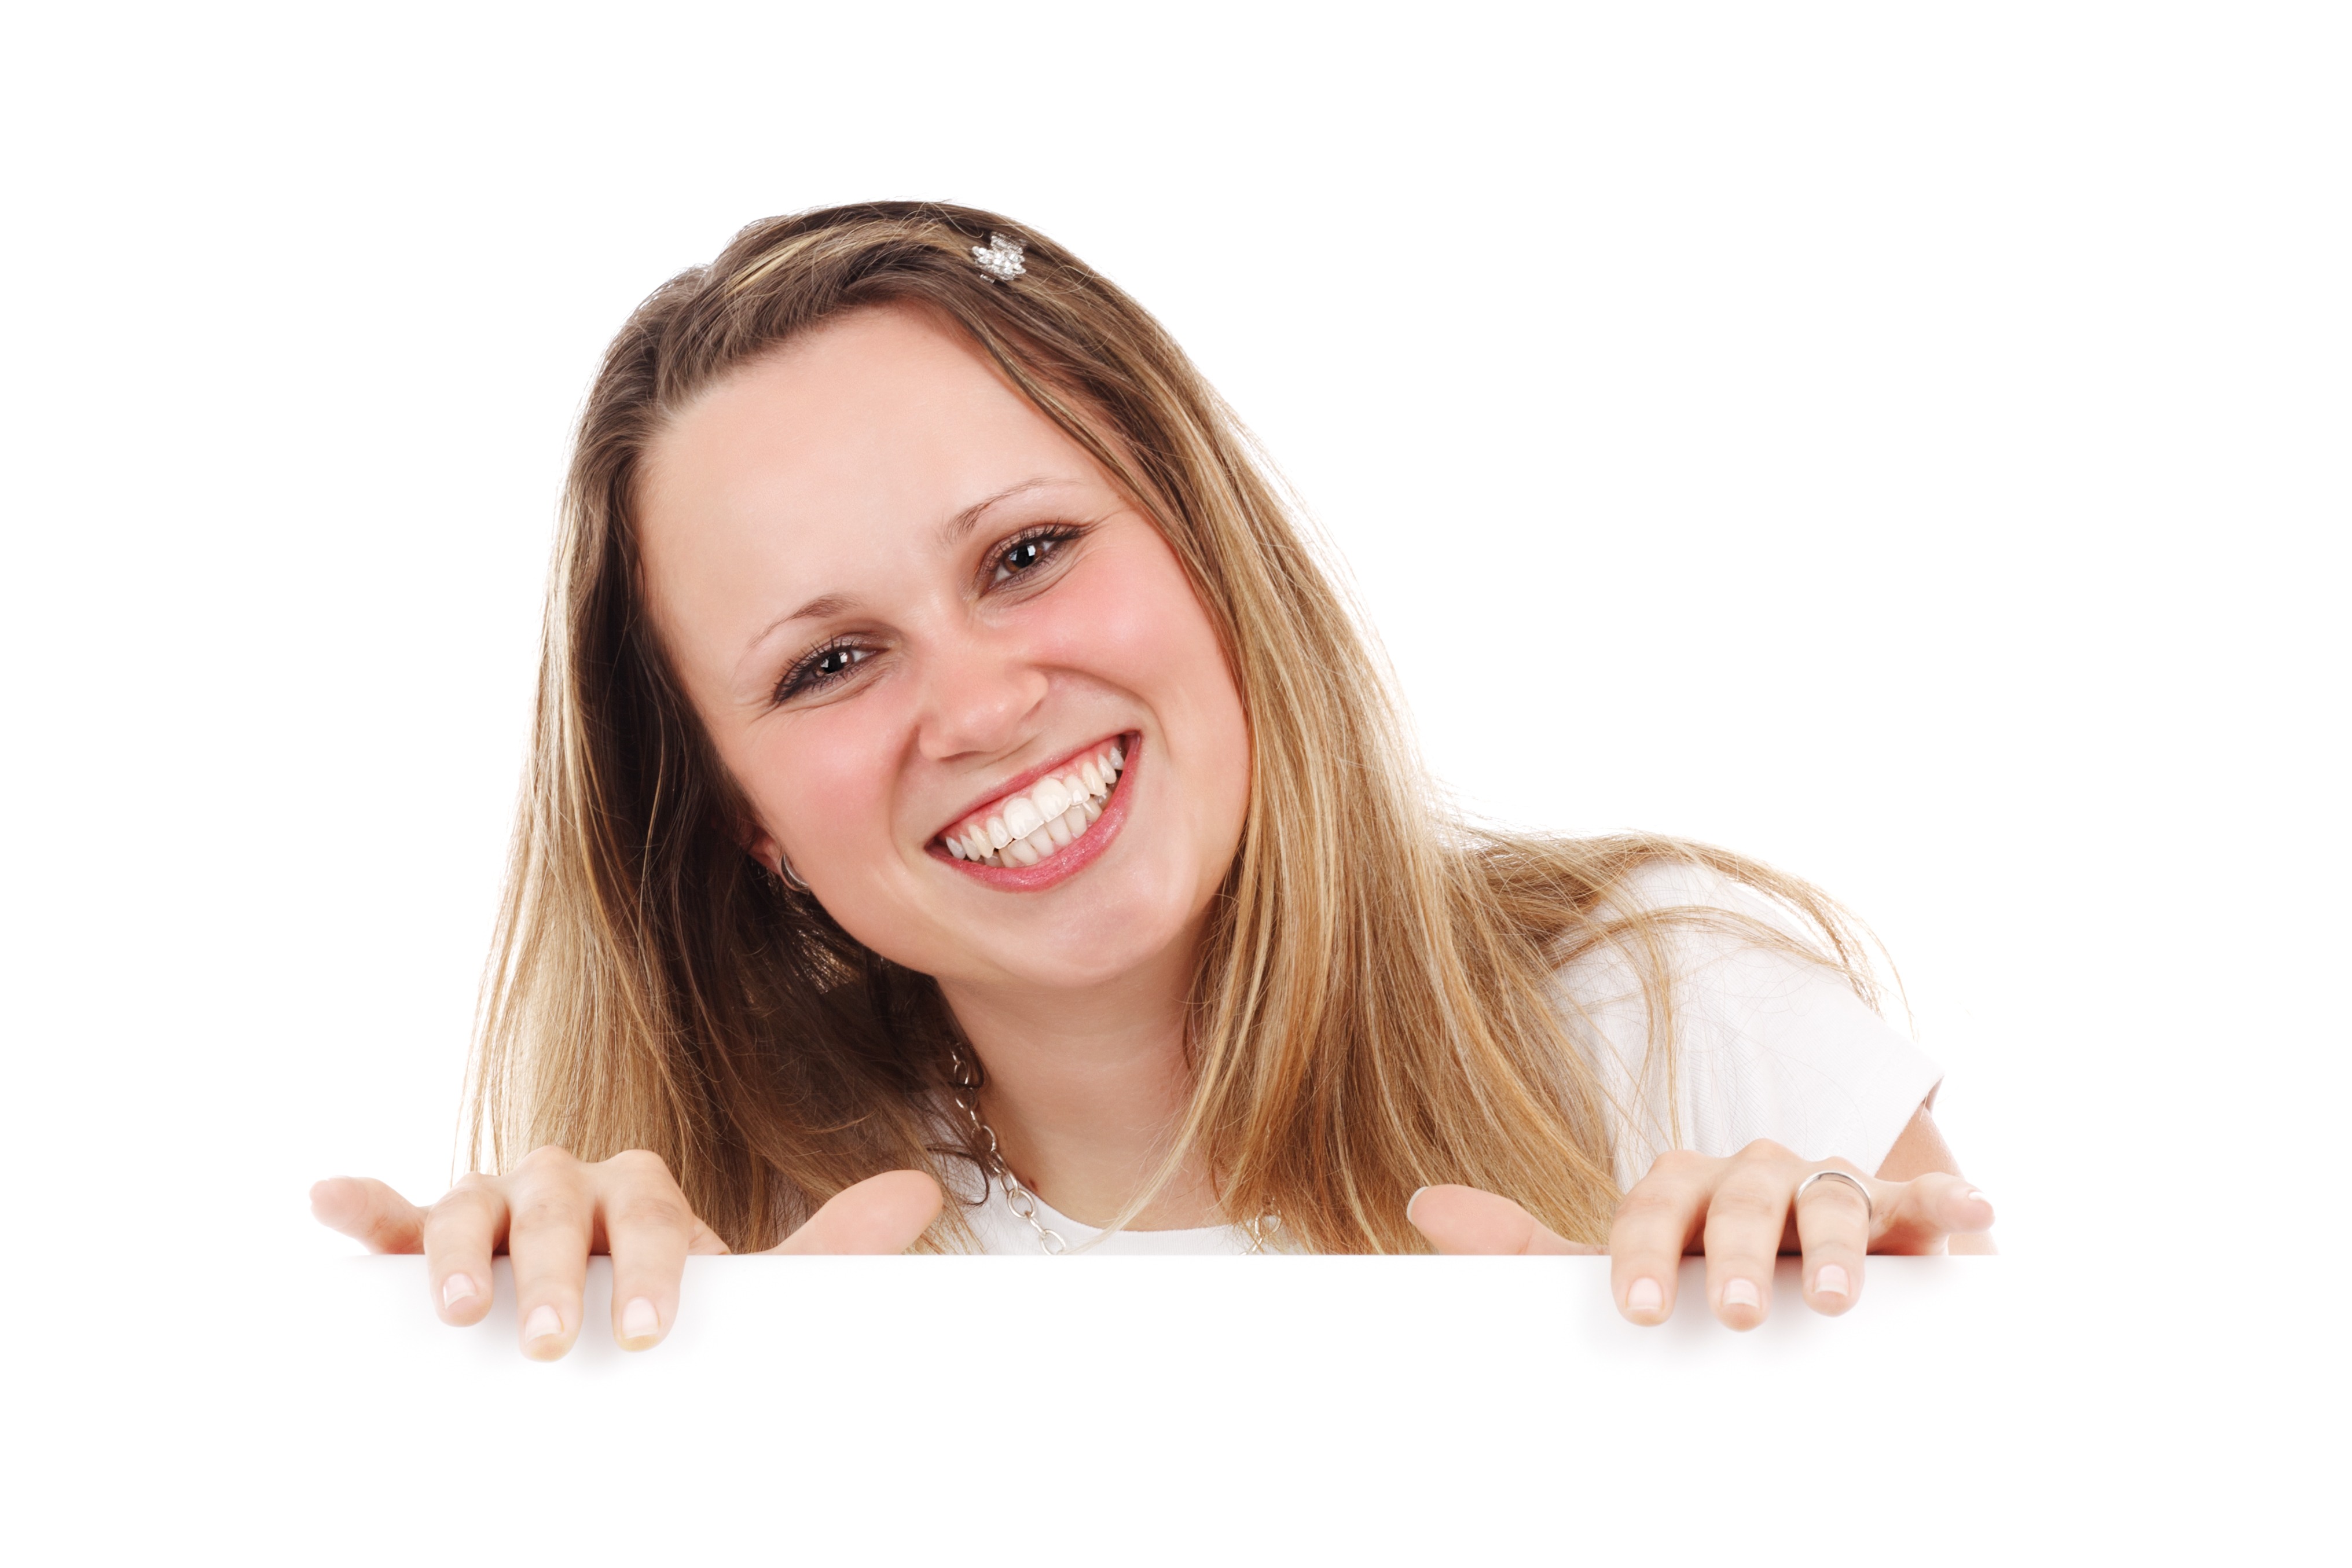 Laughing woman photo